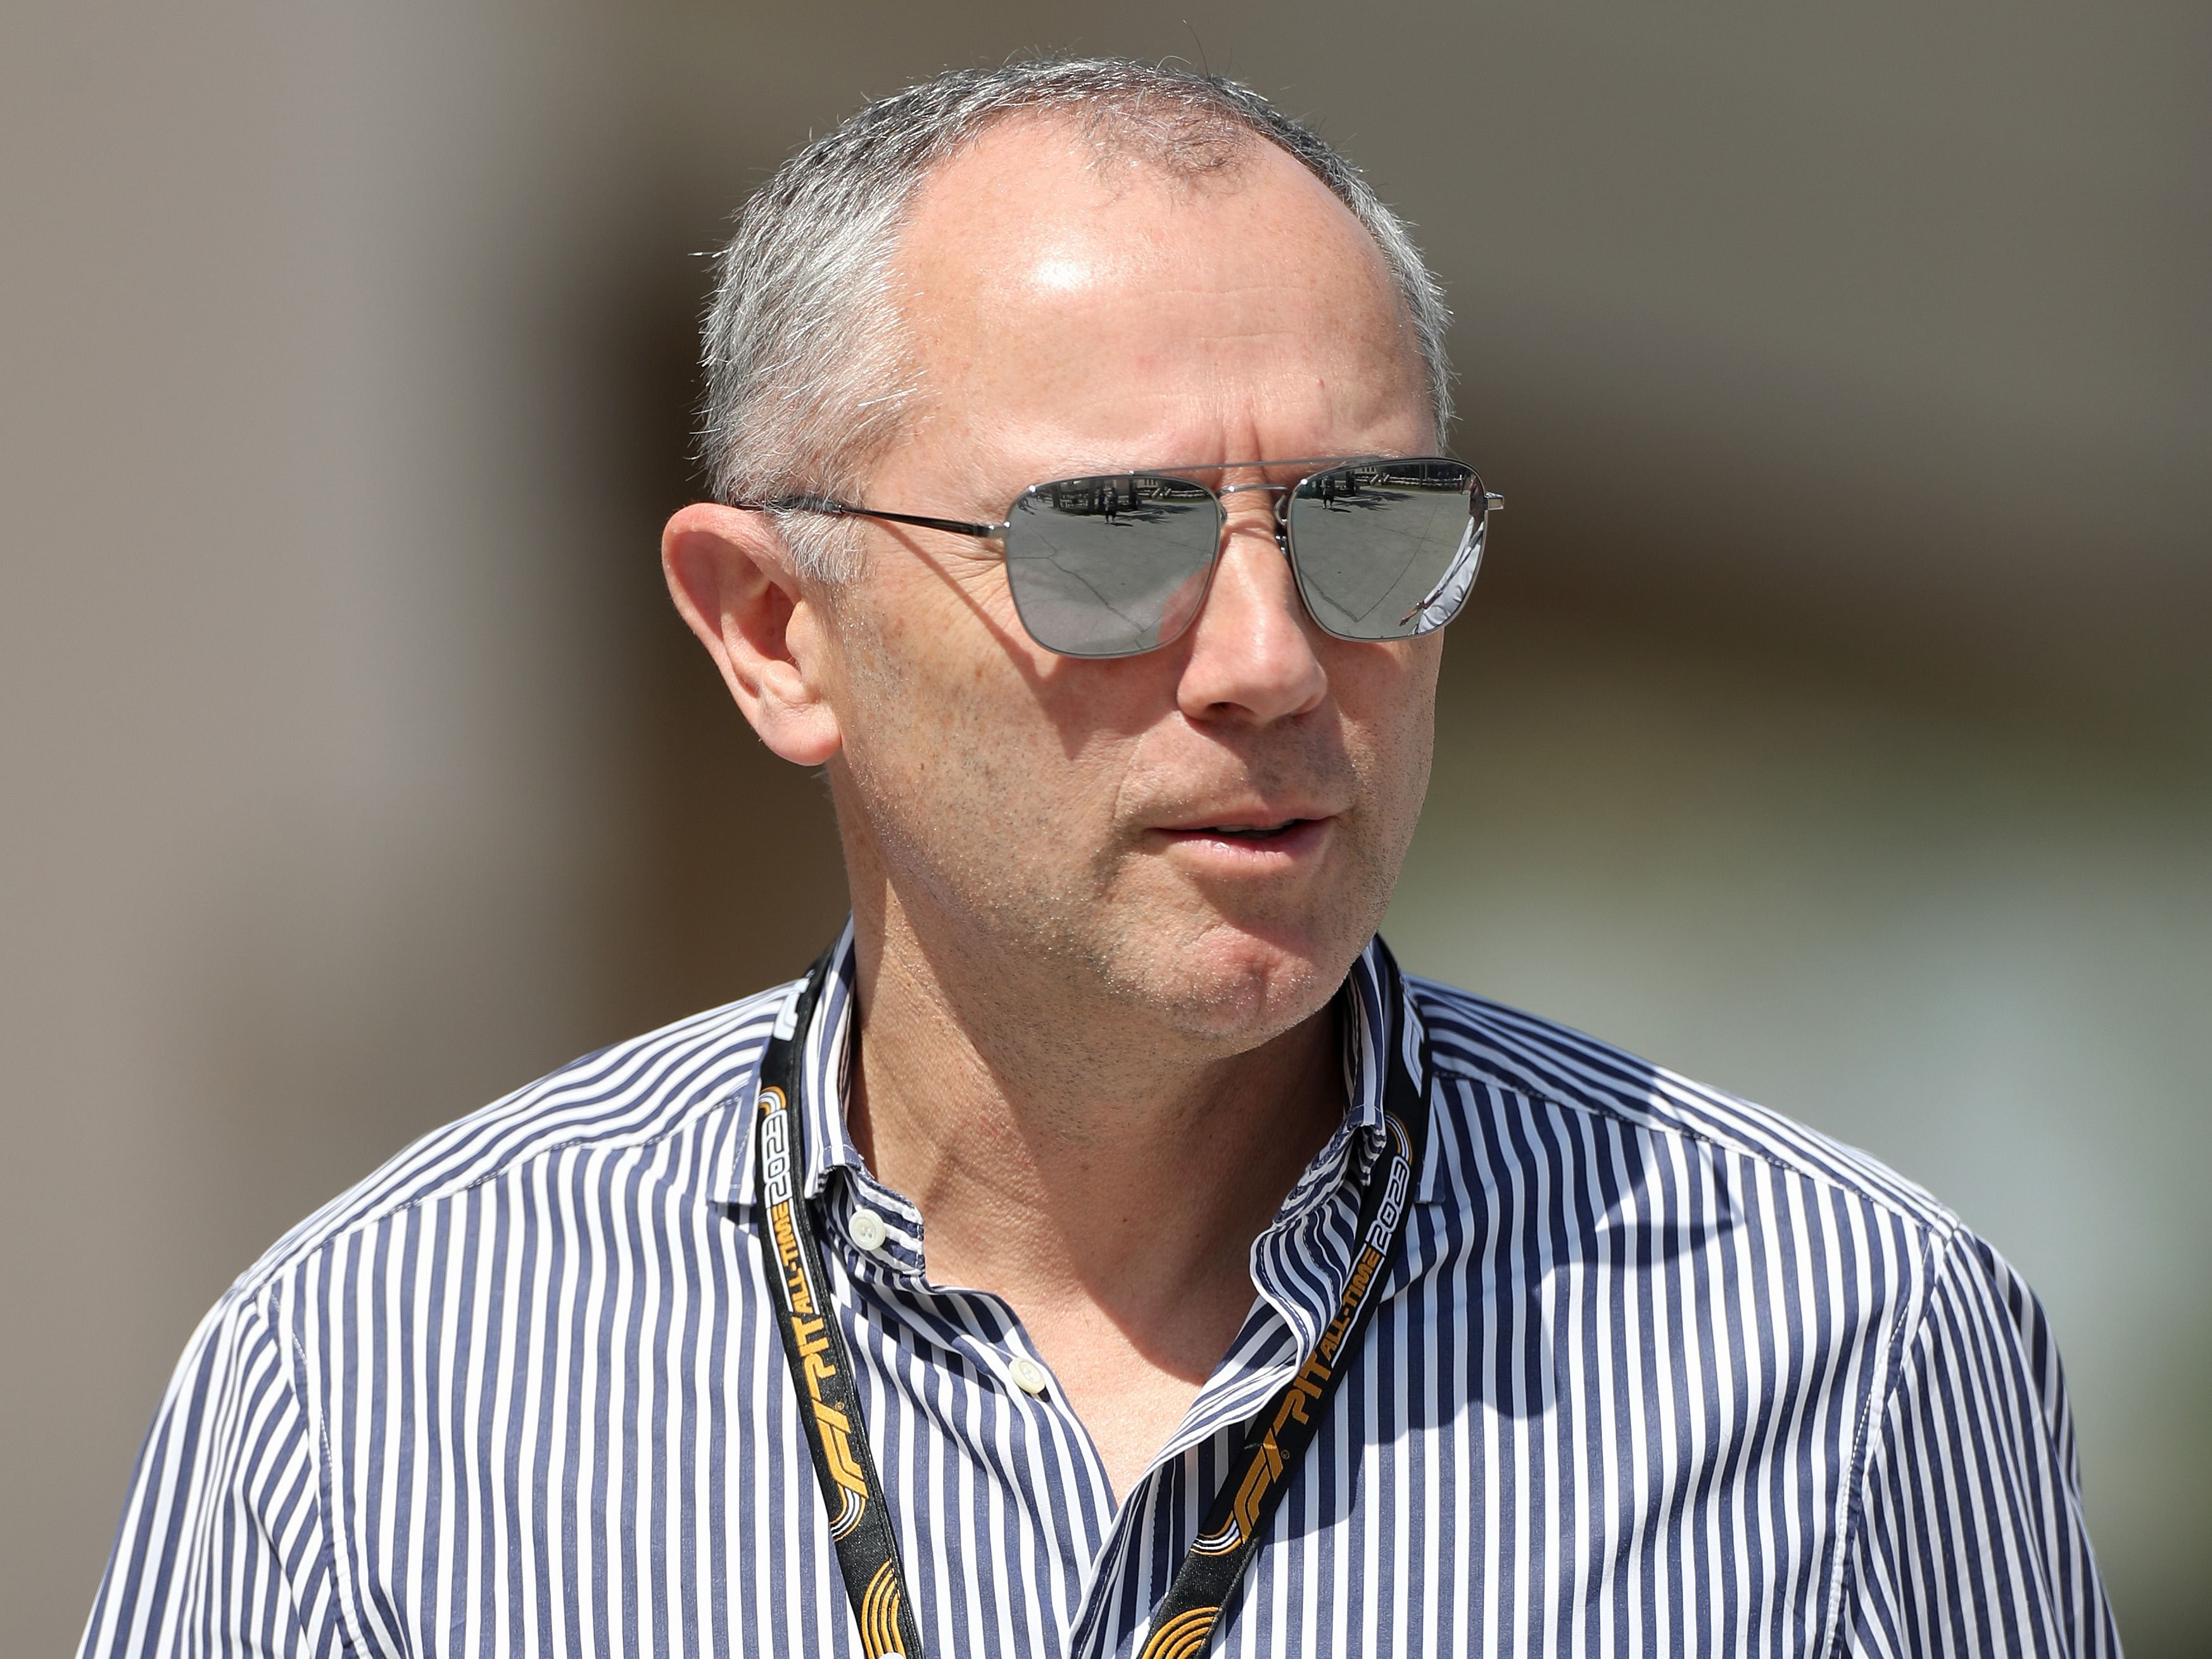 Stefano Domenicali, CEO of the Formula One Group, walks in the paddock prior to practice ahead of the 2023 F1 Bahrain Grand Prix (Photo by Peter Fox/Getty Images)